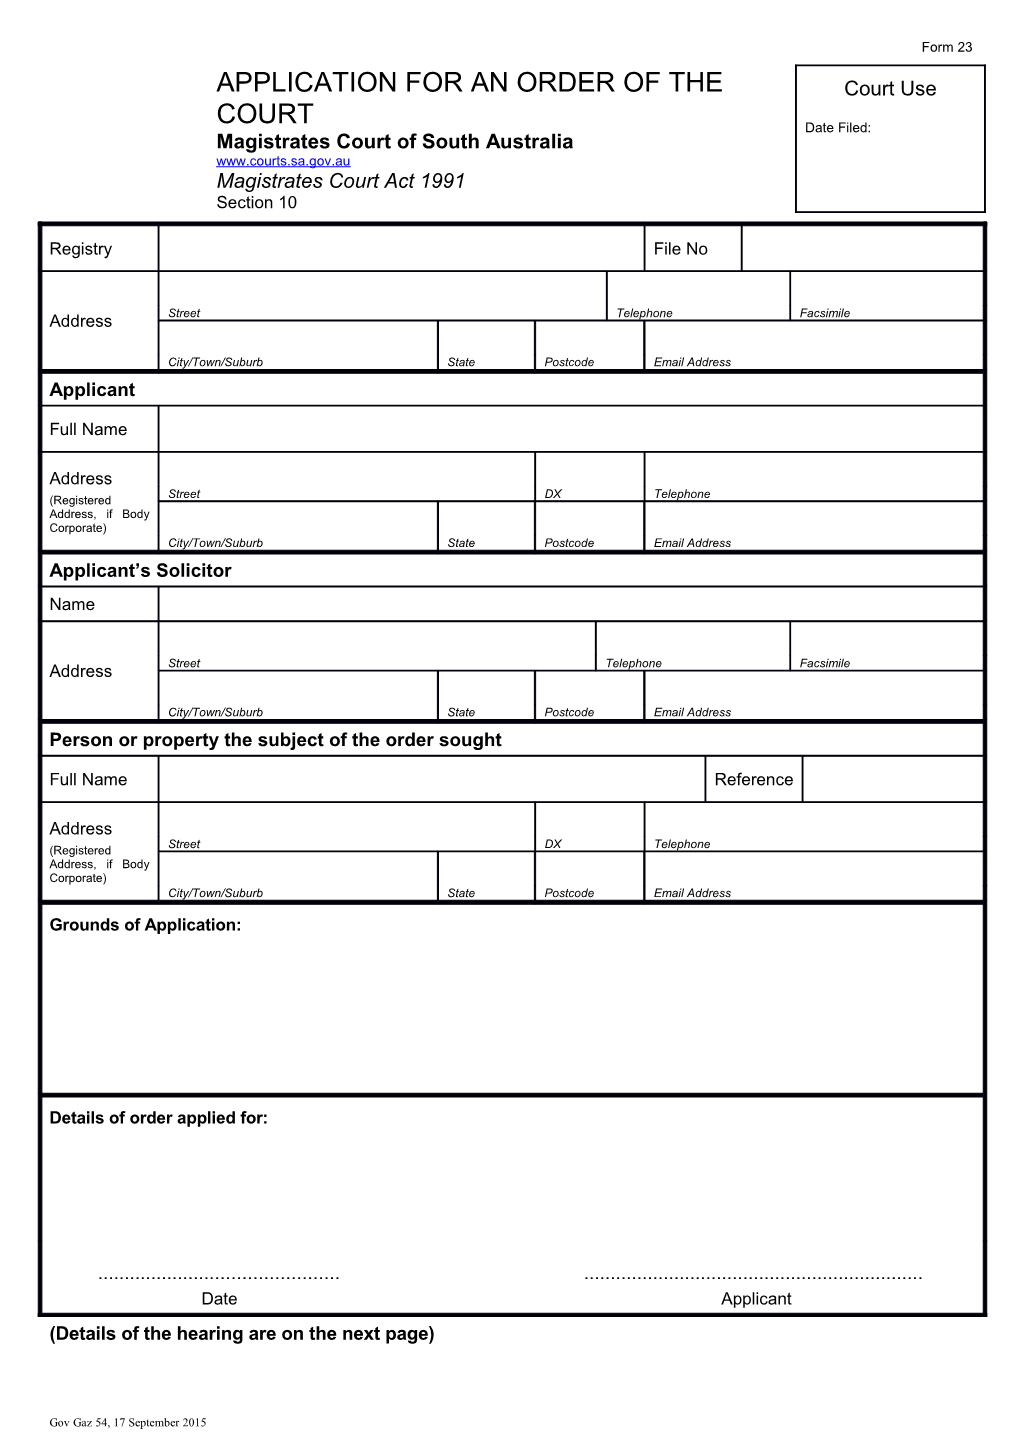 Form 23 - Application for an Order of the Court